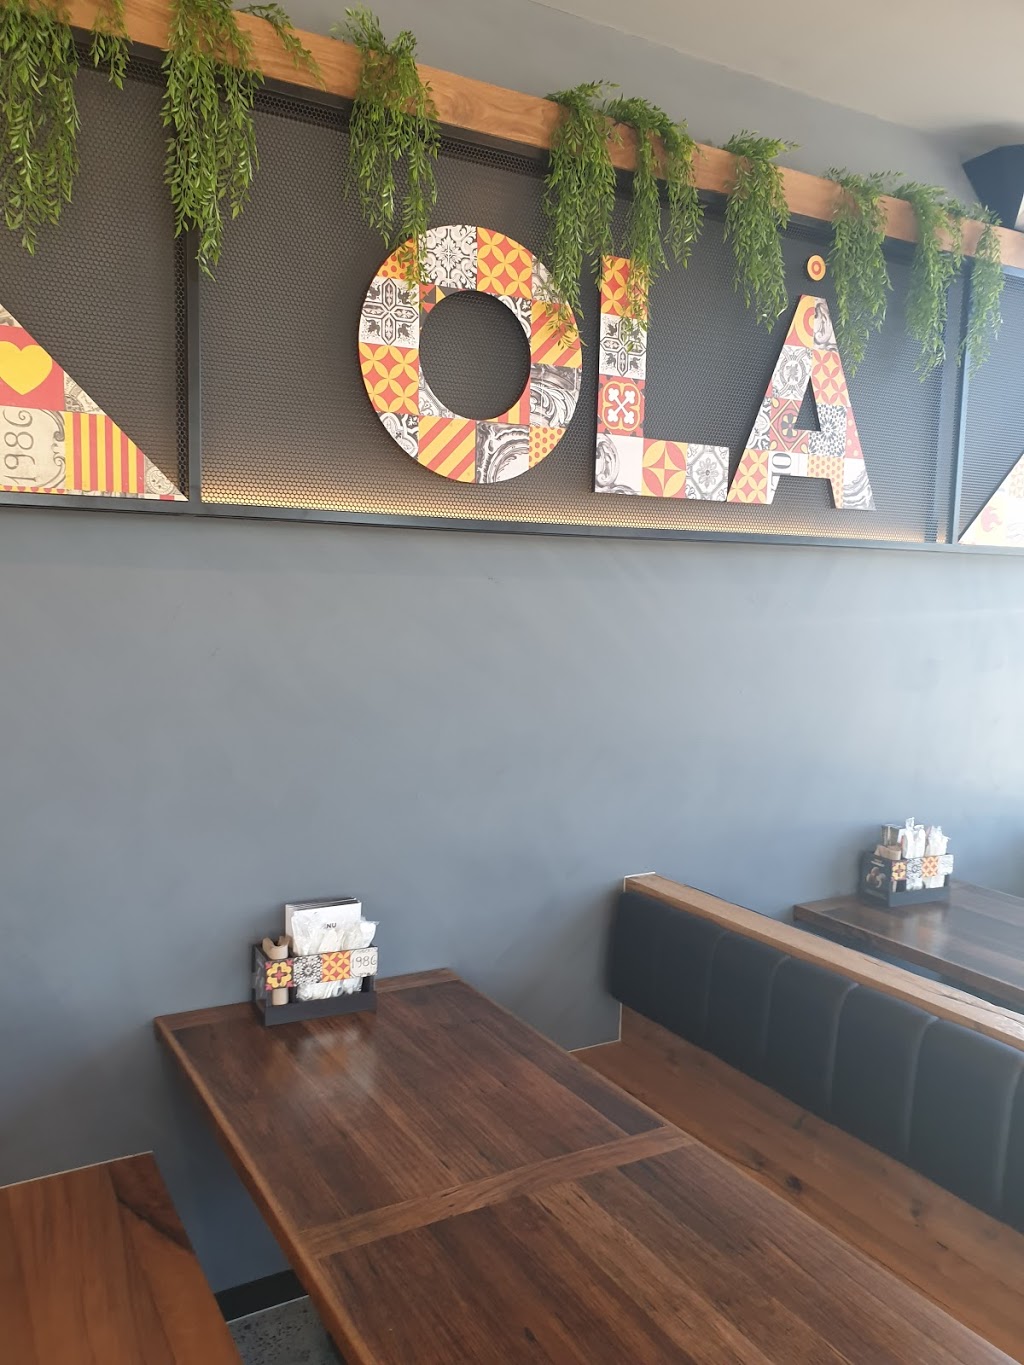 Oporto Penrith Drive Thru | restaurant | Fast Food Outlet 2, 2215-2217, Castlereagh Rd, Penrith NSW 2750, Australia | 0291213946 OR +61 2 9121 3946